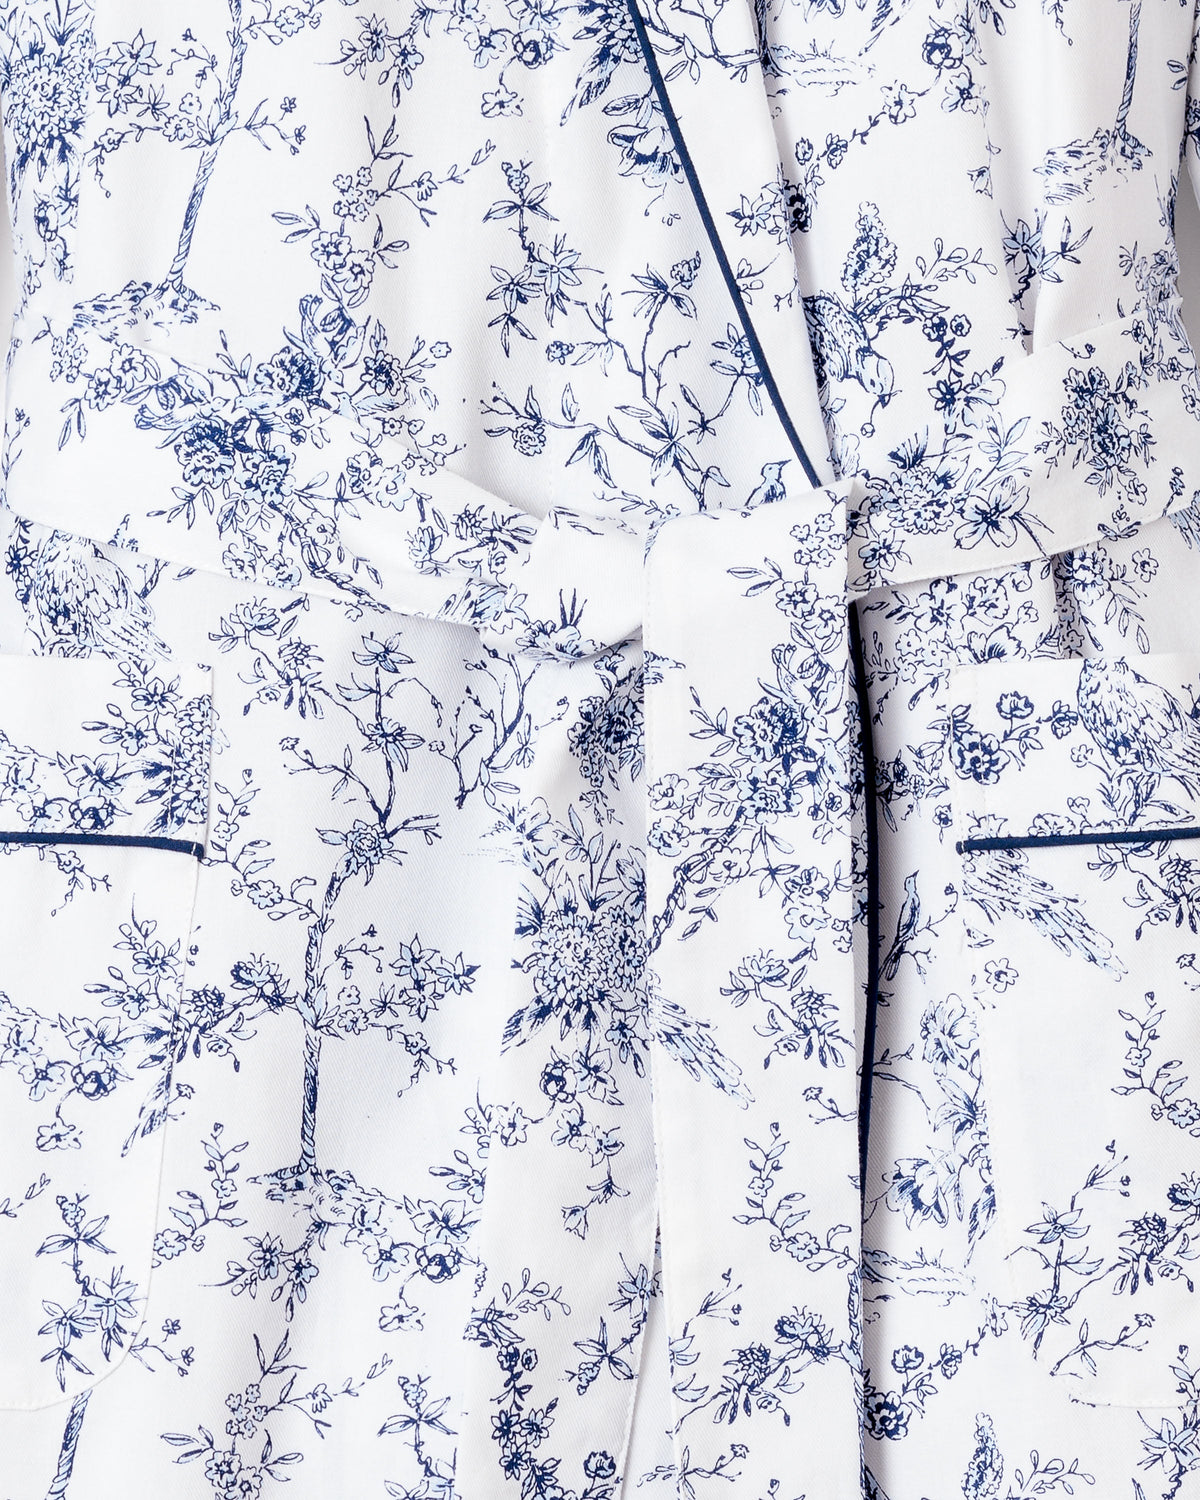 Women's Twill Robe in Timeless Toile